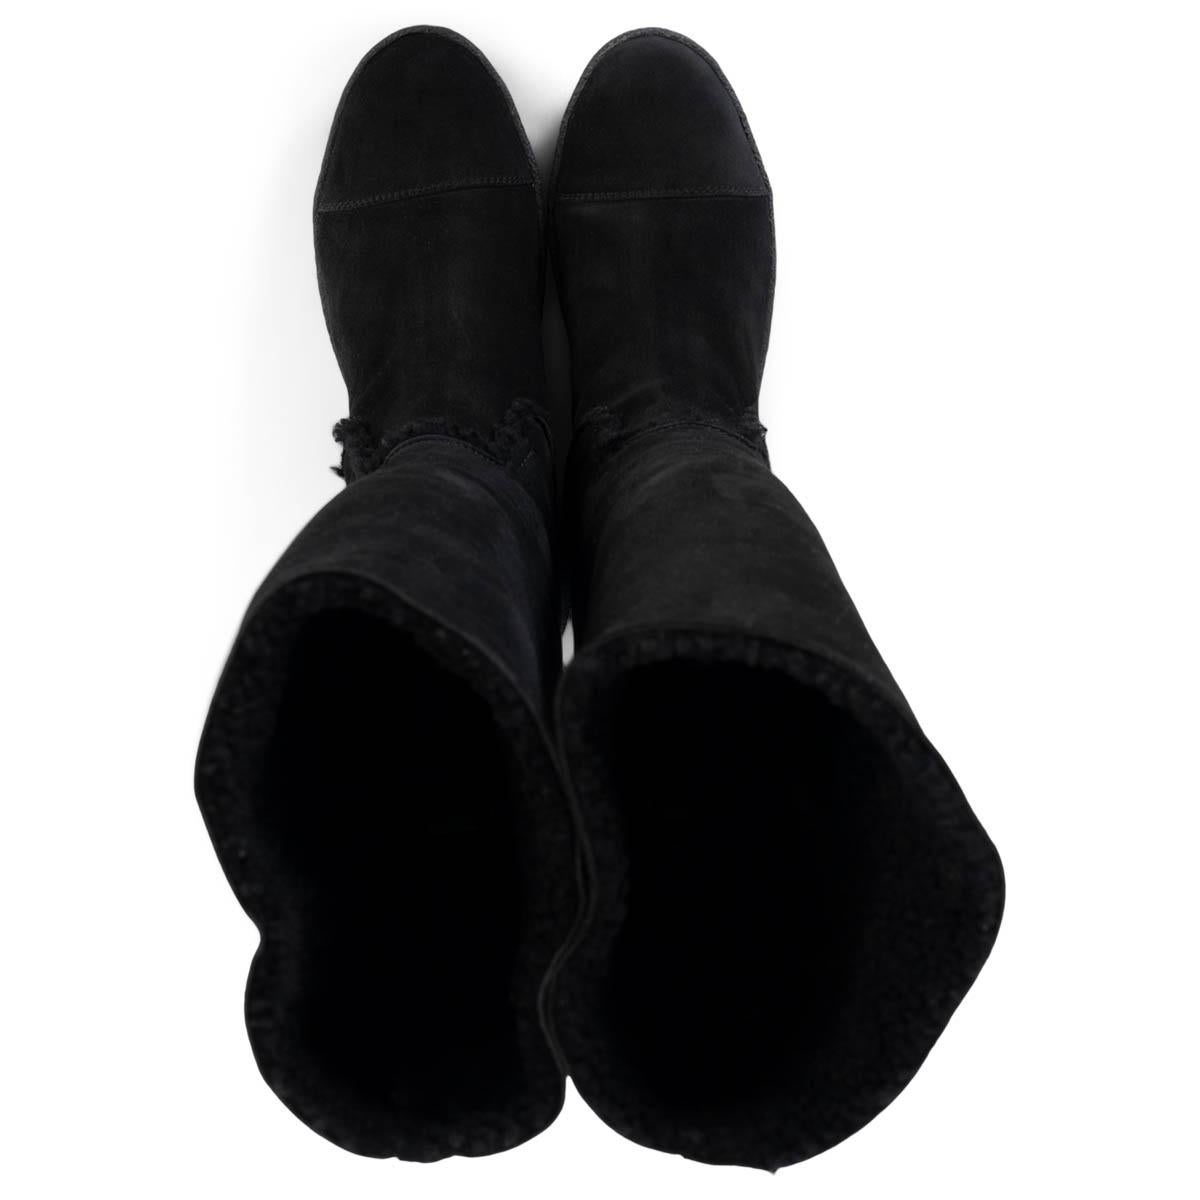 CHANEL black suede 2008 SHEARLING FLAT Boots Shoes 39 1